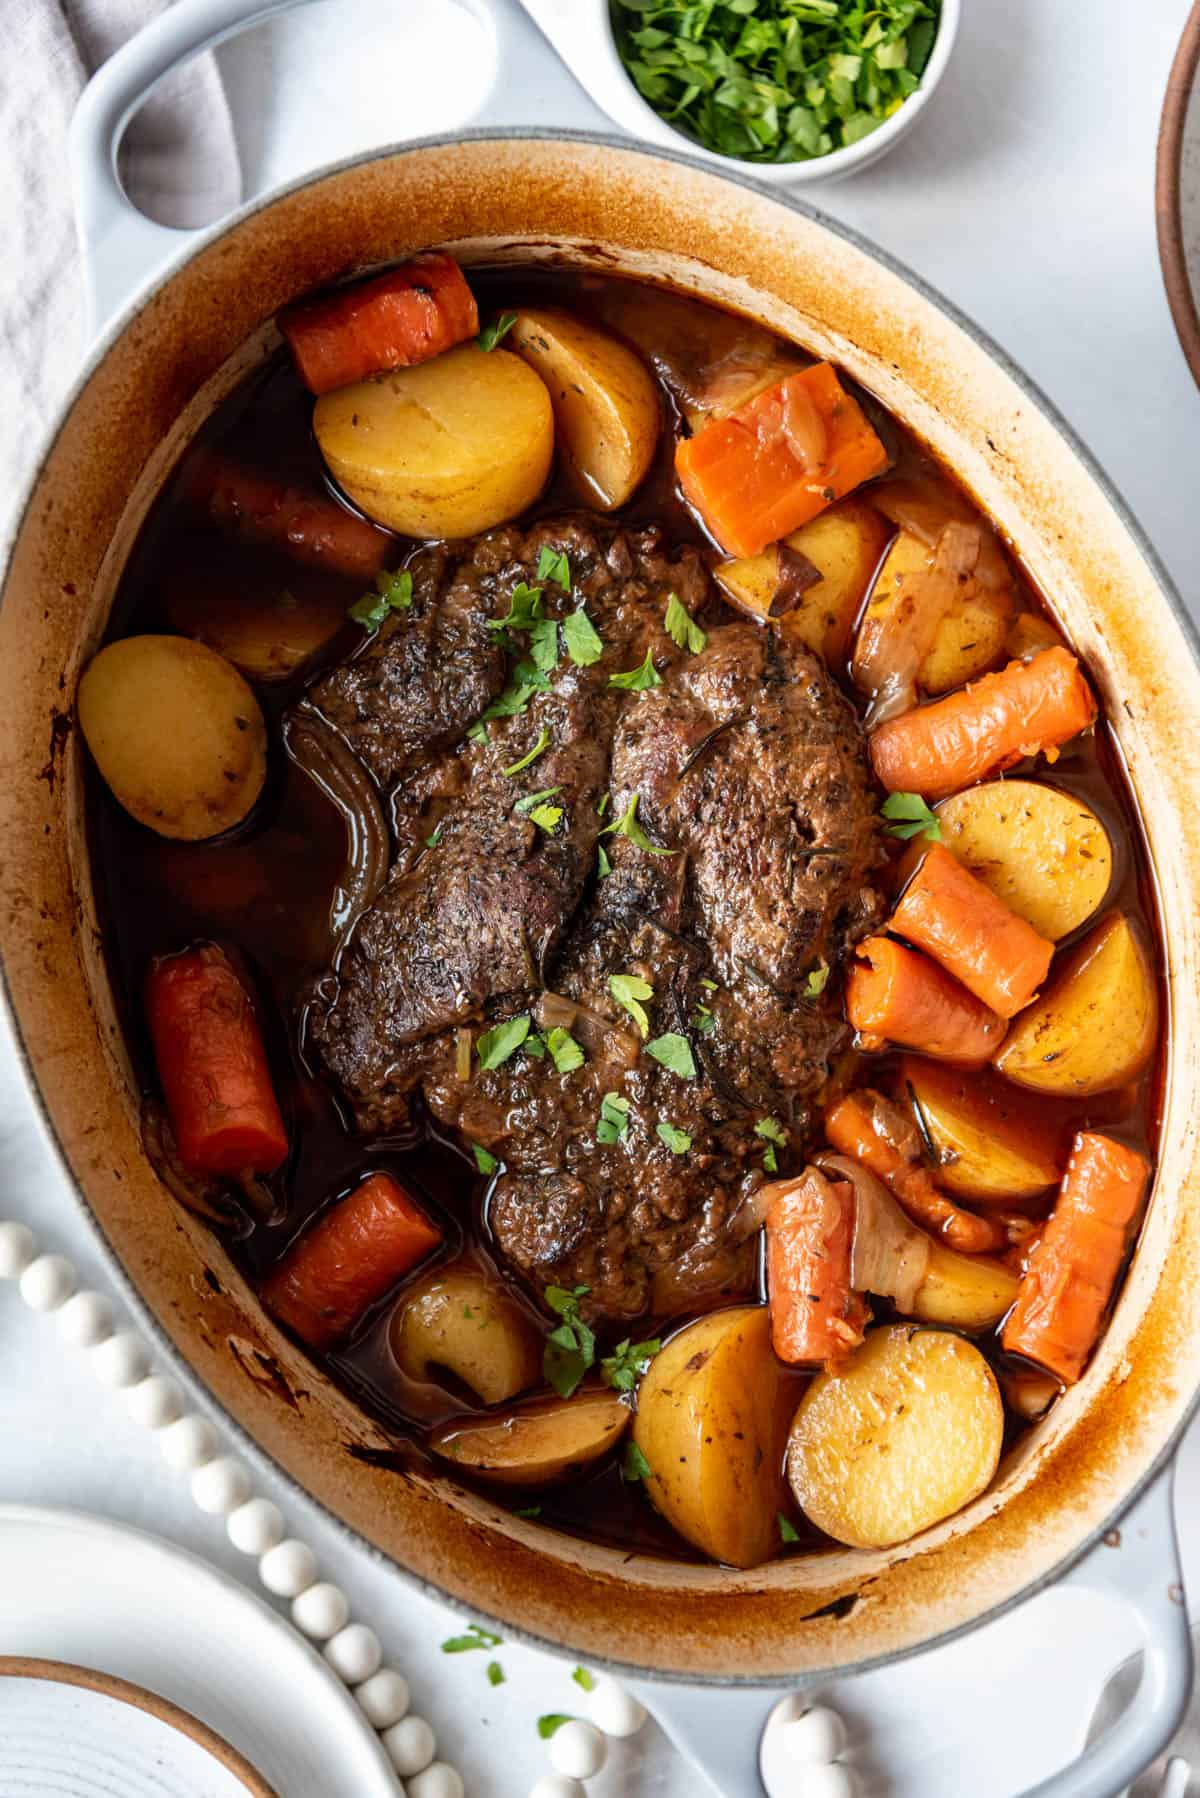 Parsley sprinkled over pot roast and vegetables in a Dutch oven.